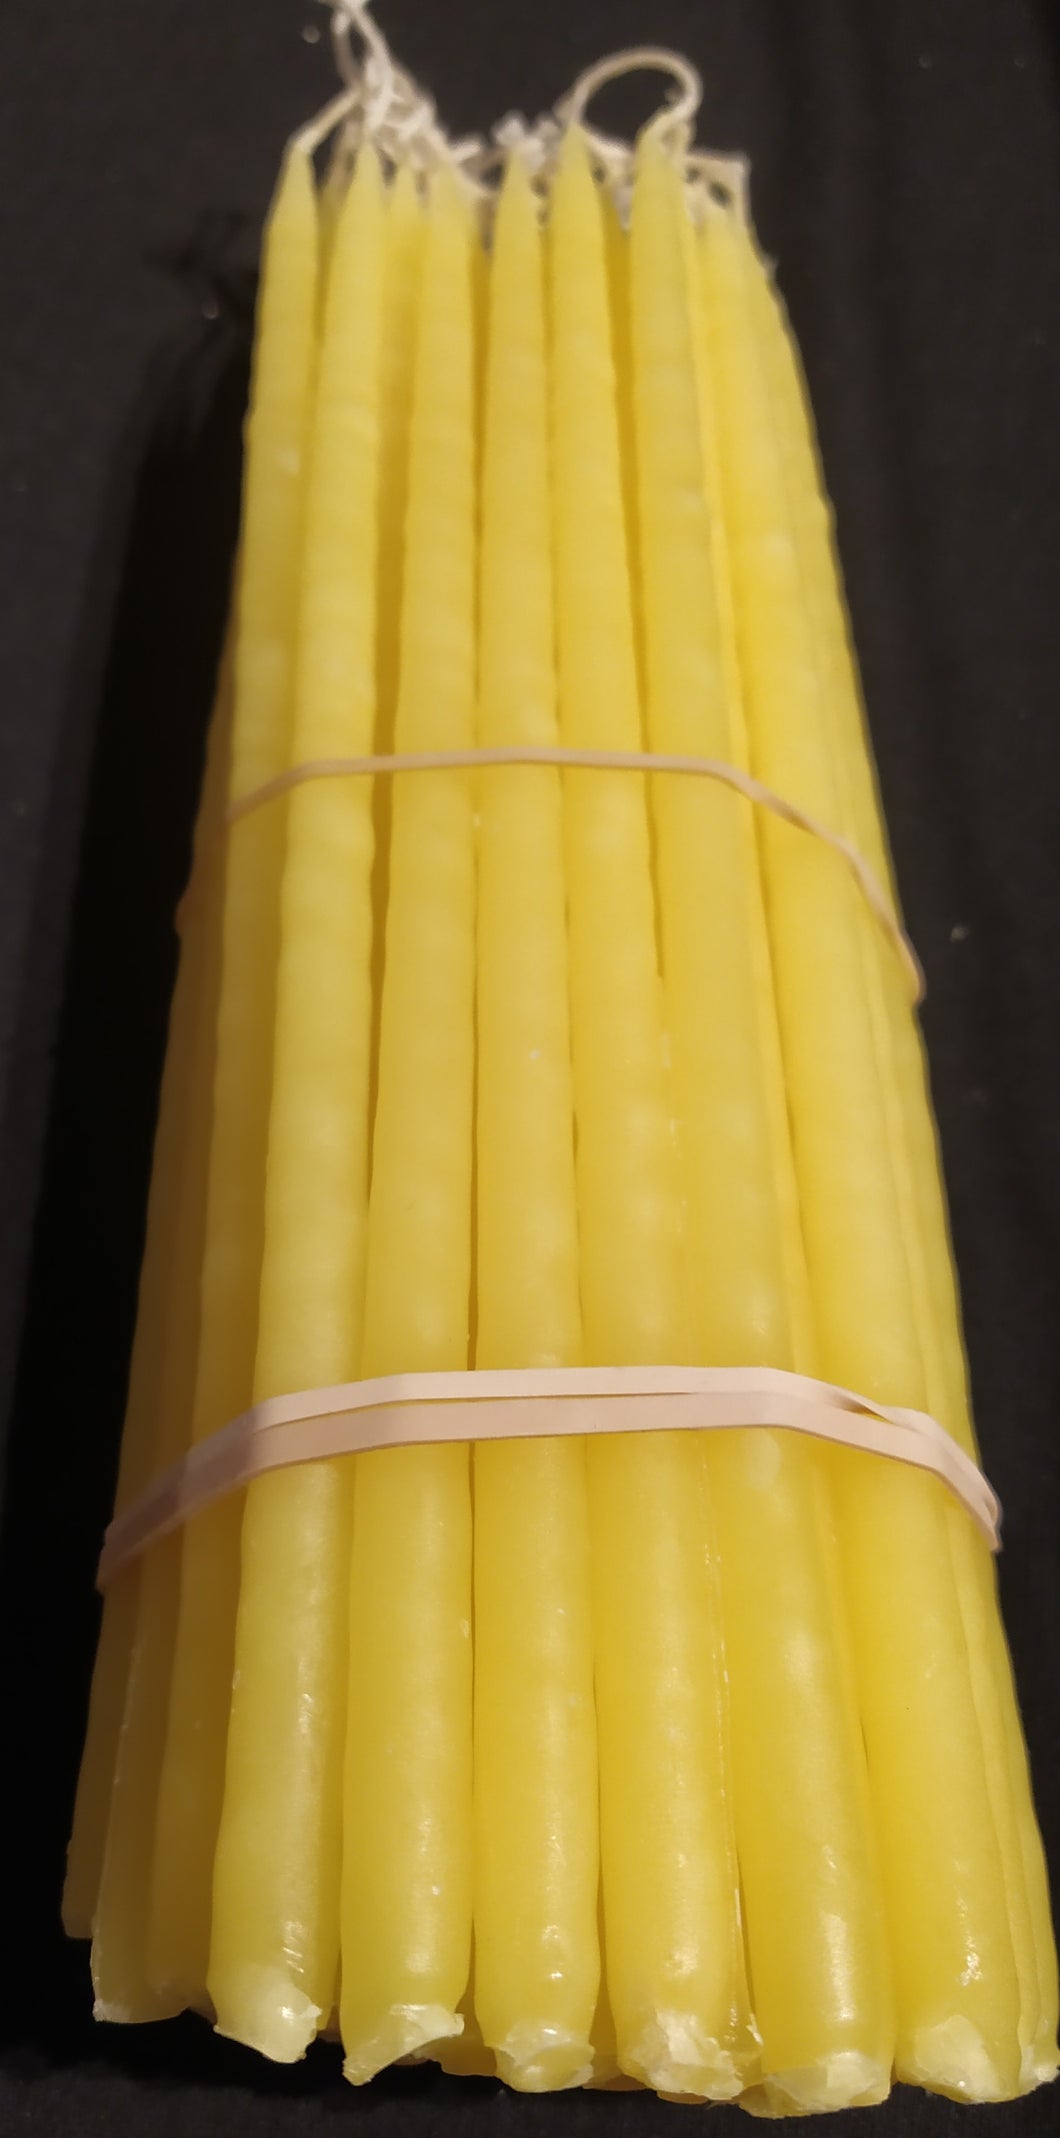 Candle-Beeswax Taper